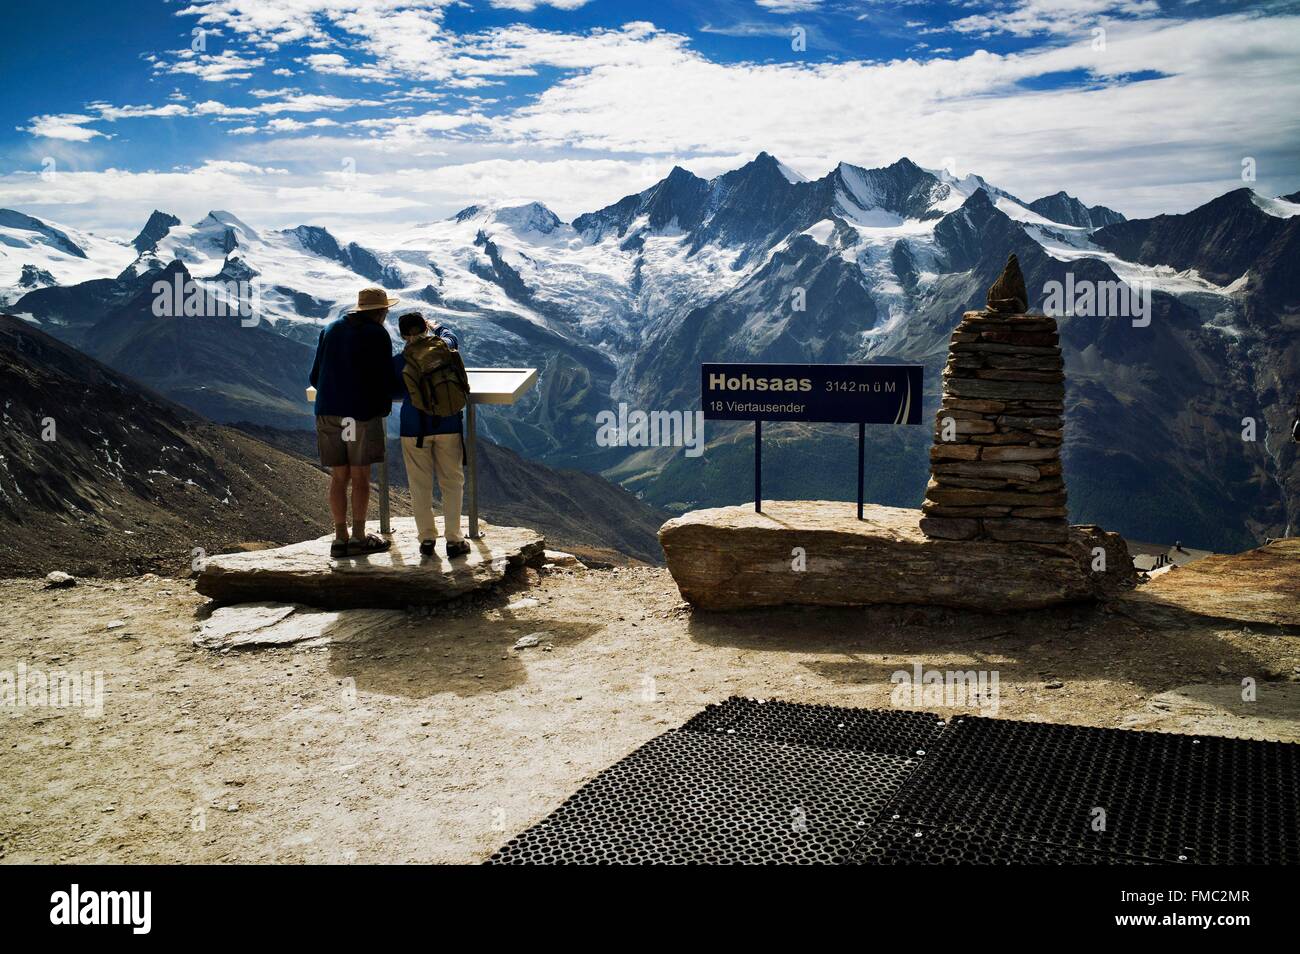 Switzerland, Canton of Valais, Saas Valley, Saas Grund, Hohsaas 3098 m, chain of Dom and Saas Fee glaciers Stock Photo